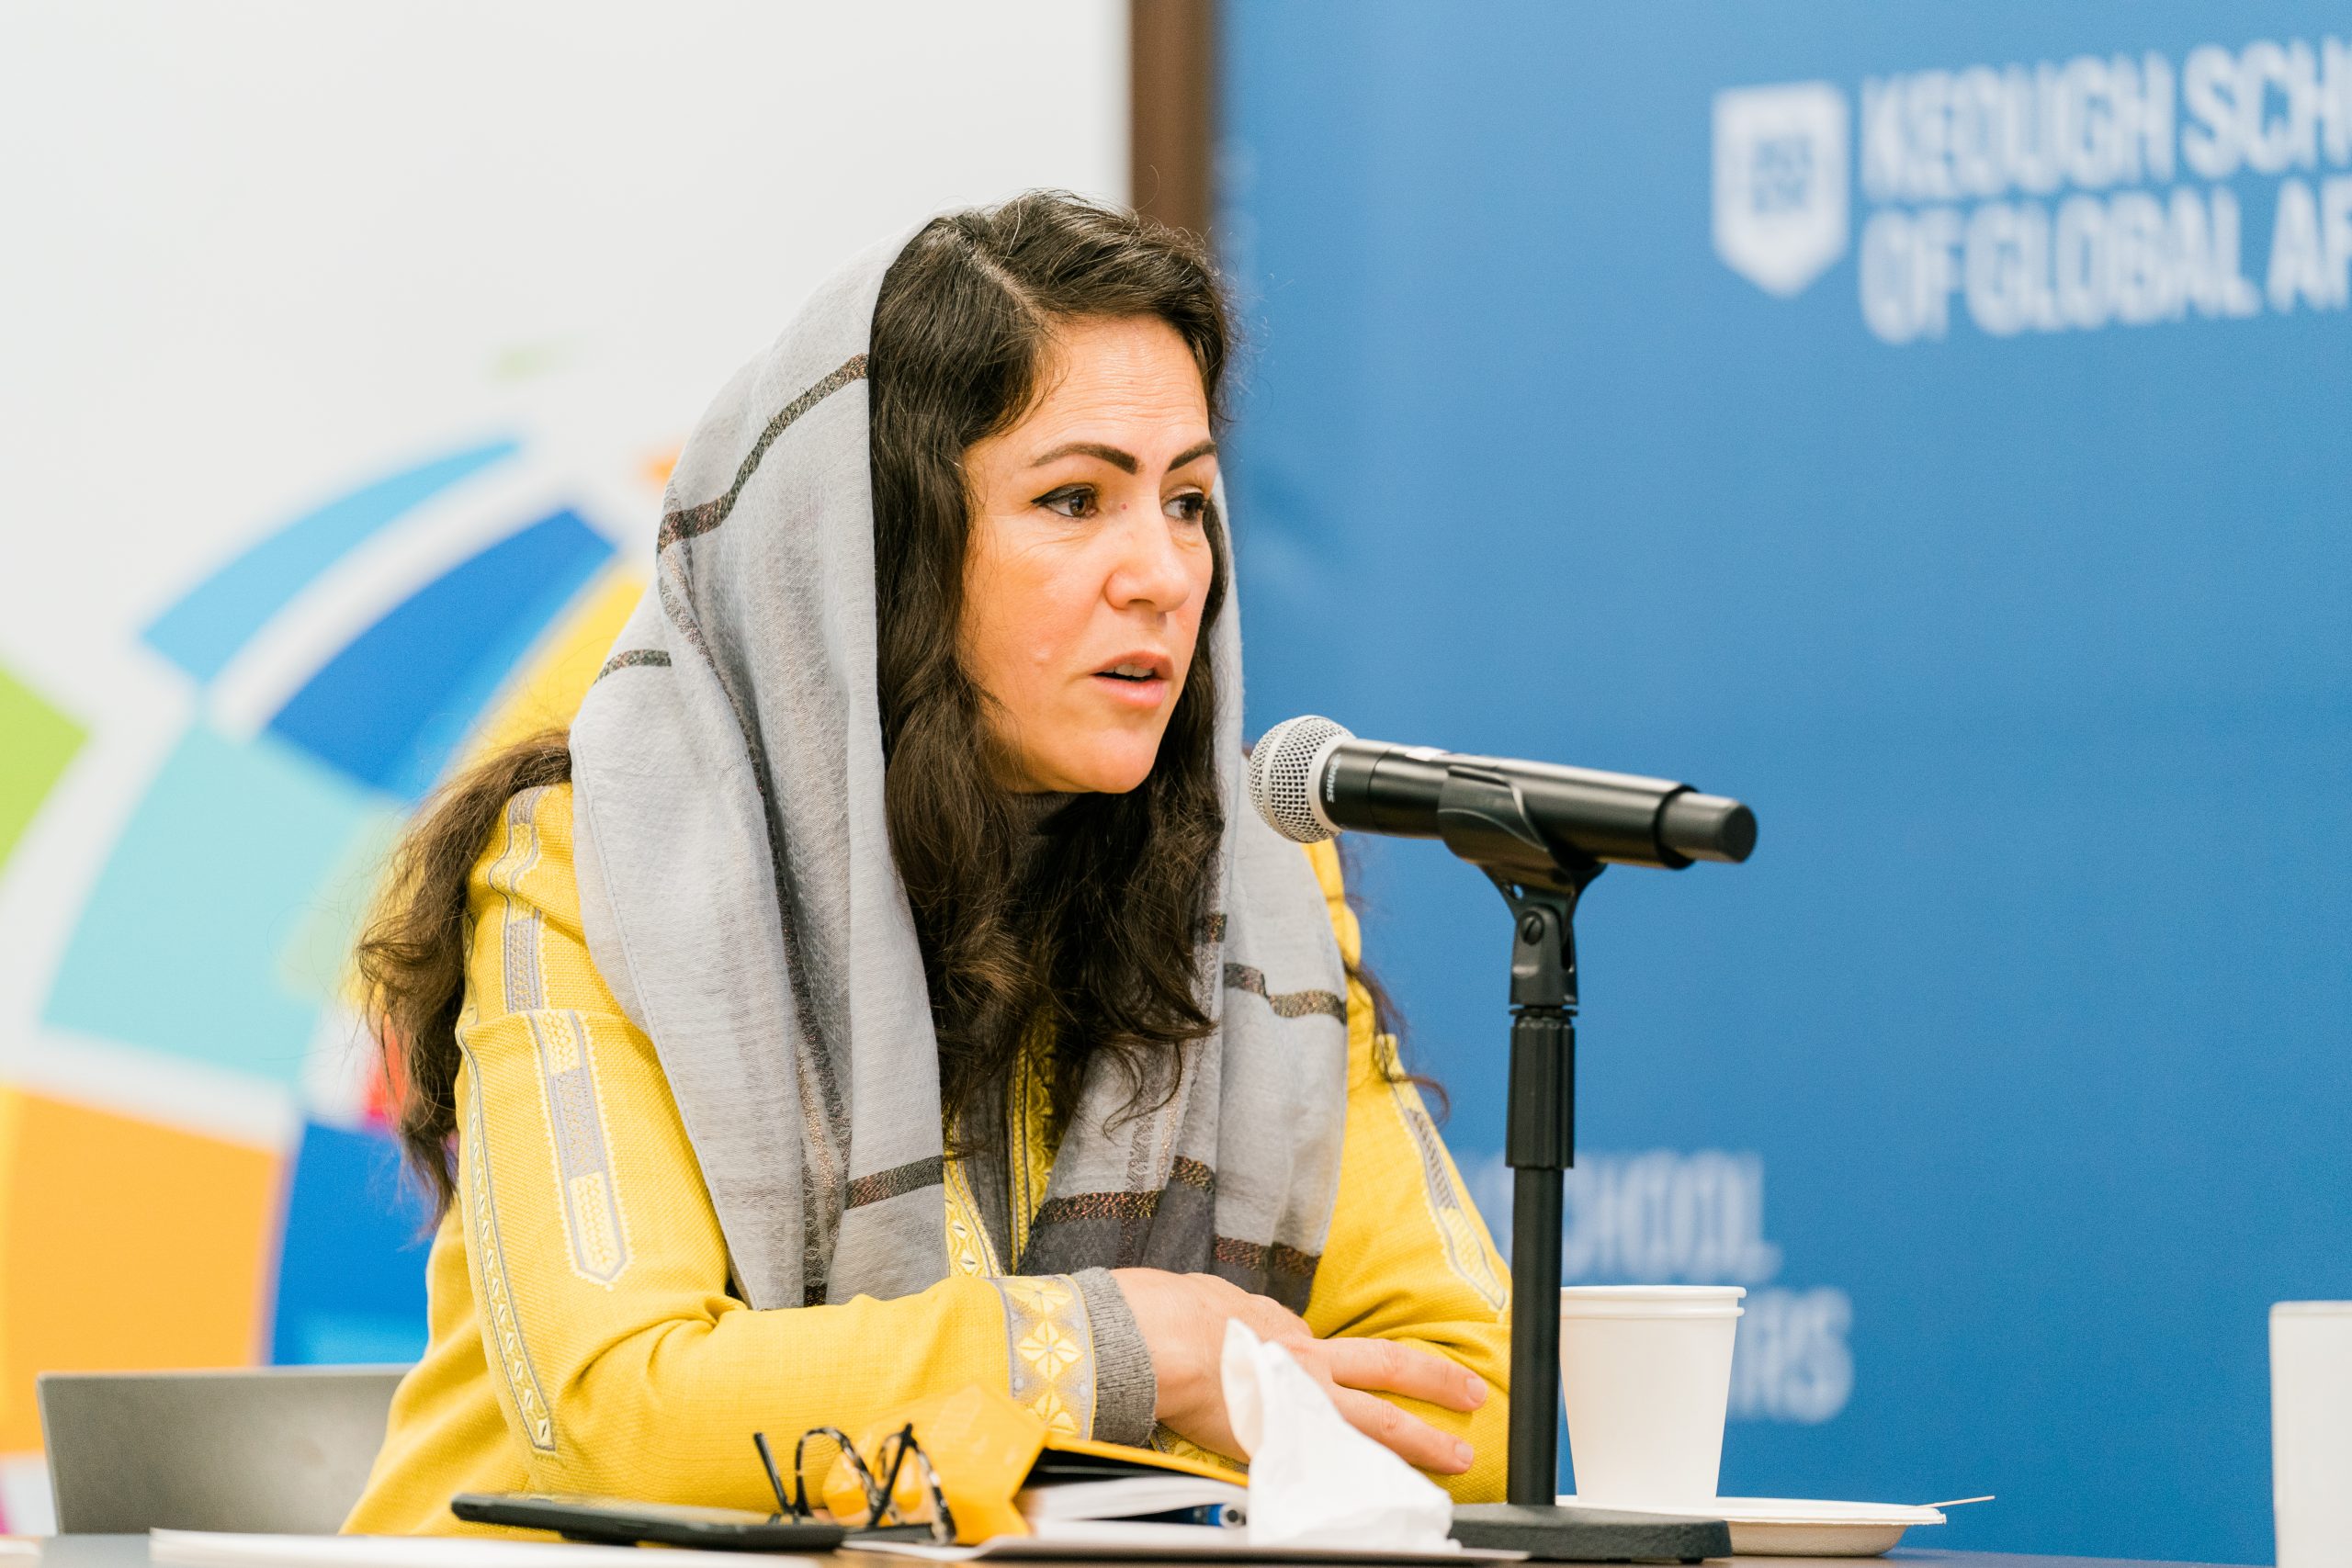 Fawzia Koofi, an Afghan women’s rights activist and former member of parliament, stresses the need for ongoing negotiations to build a more democratic and responsive government. She was part of a recent Notre Dame international development panel held in Washington, DC.